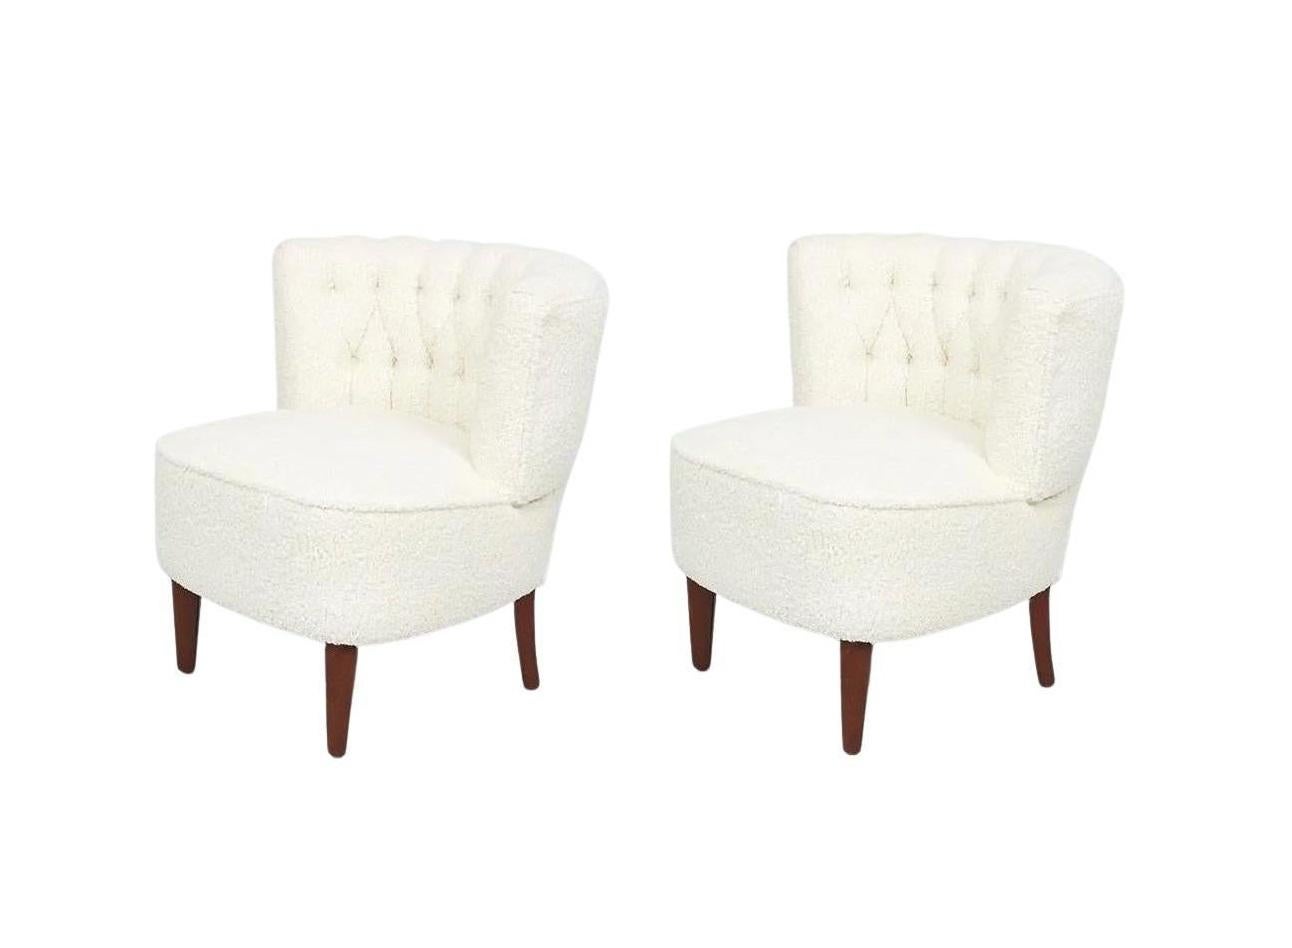 Mid-Century Otto Schultz Lounge Chairs in Bouclé, Sweden, ca 1950s For Sale 1